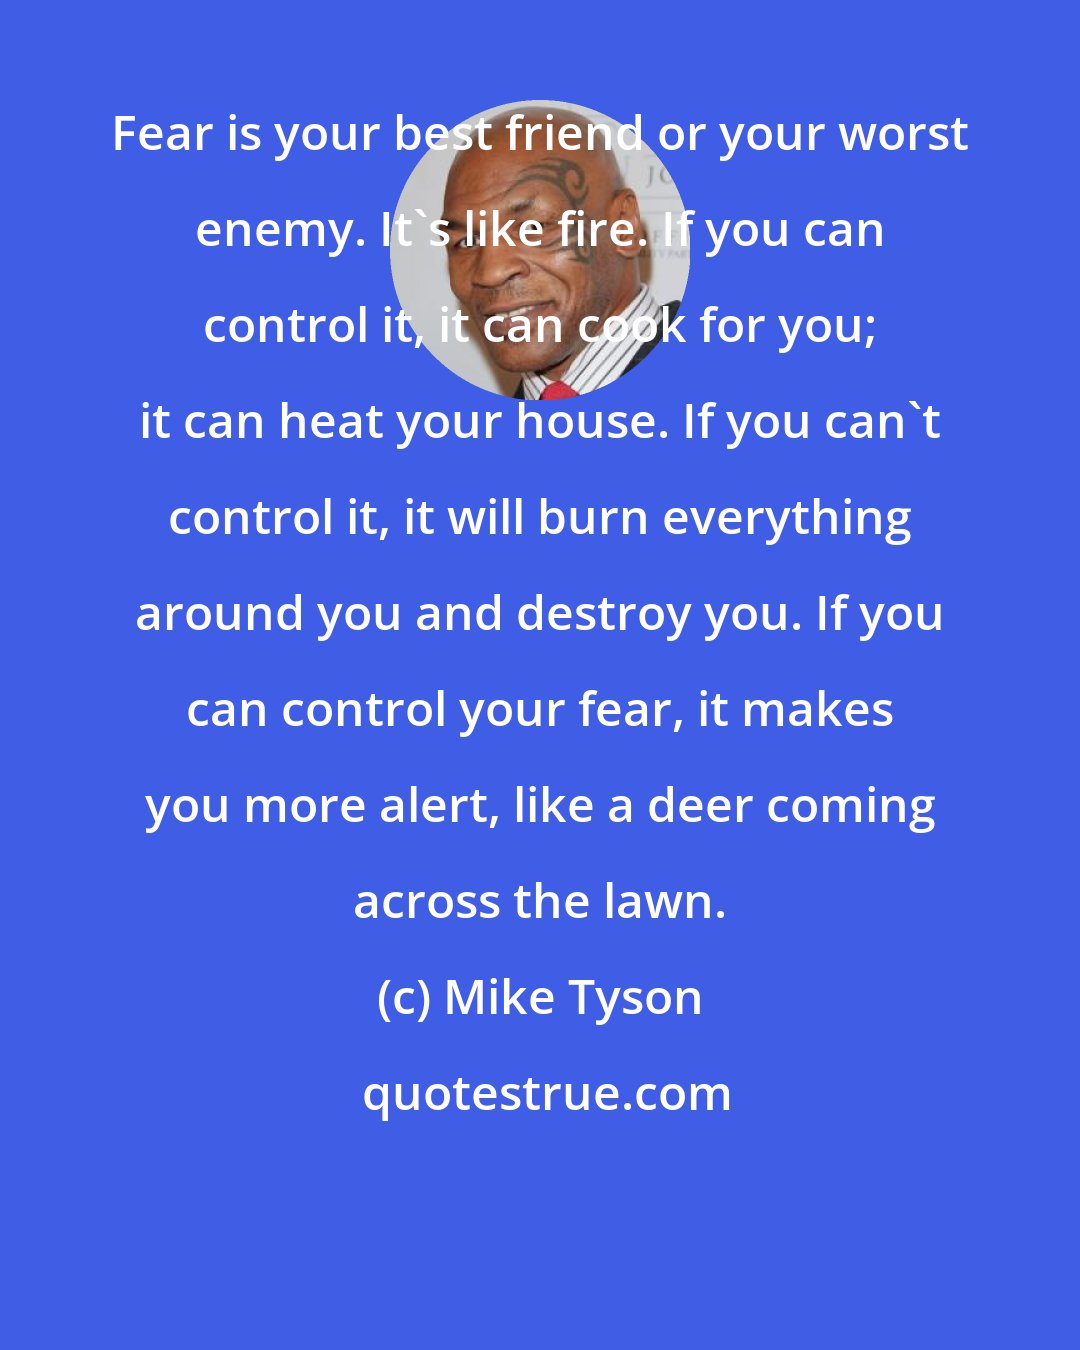 Mike Tyson: Fear is your best friend or your worst enemy. It's like fire. If you can control it, it can cook for you; it can heat your house. If you can't control it, it will burn everything around you and destroy you. If you can control your fear, it makes you more alert, like a deer coming across the lawn.